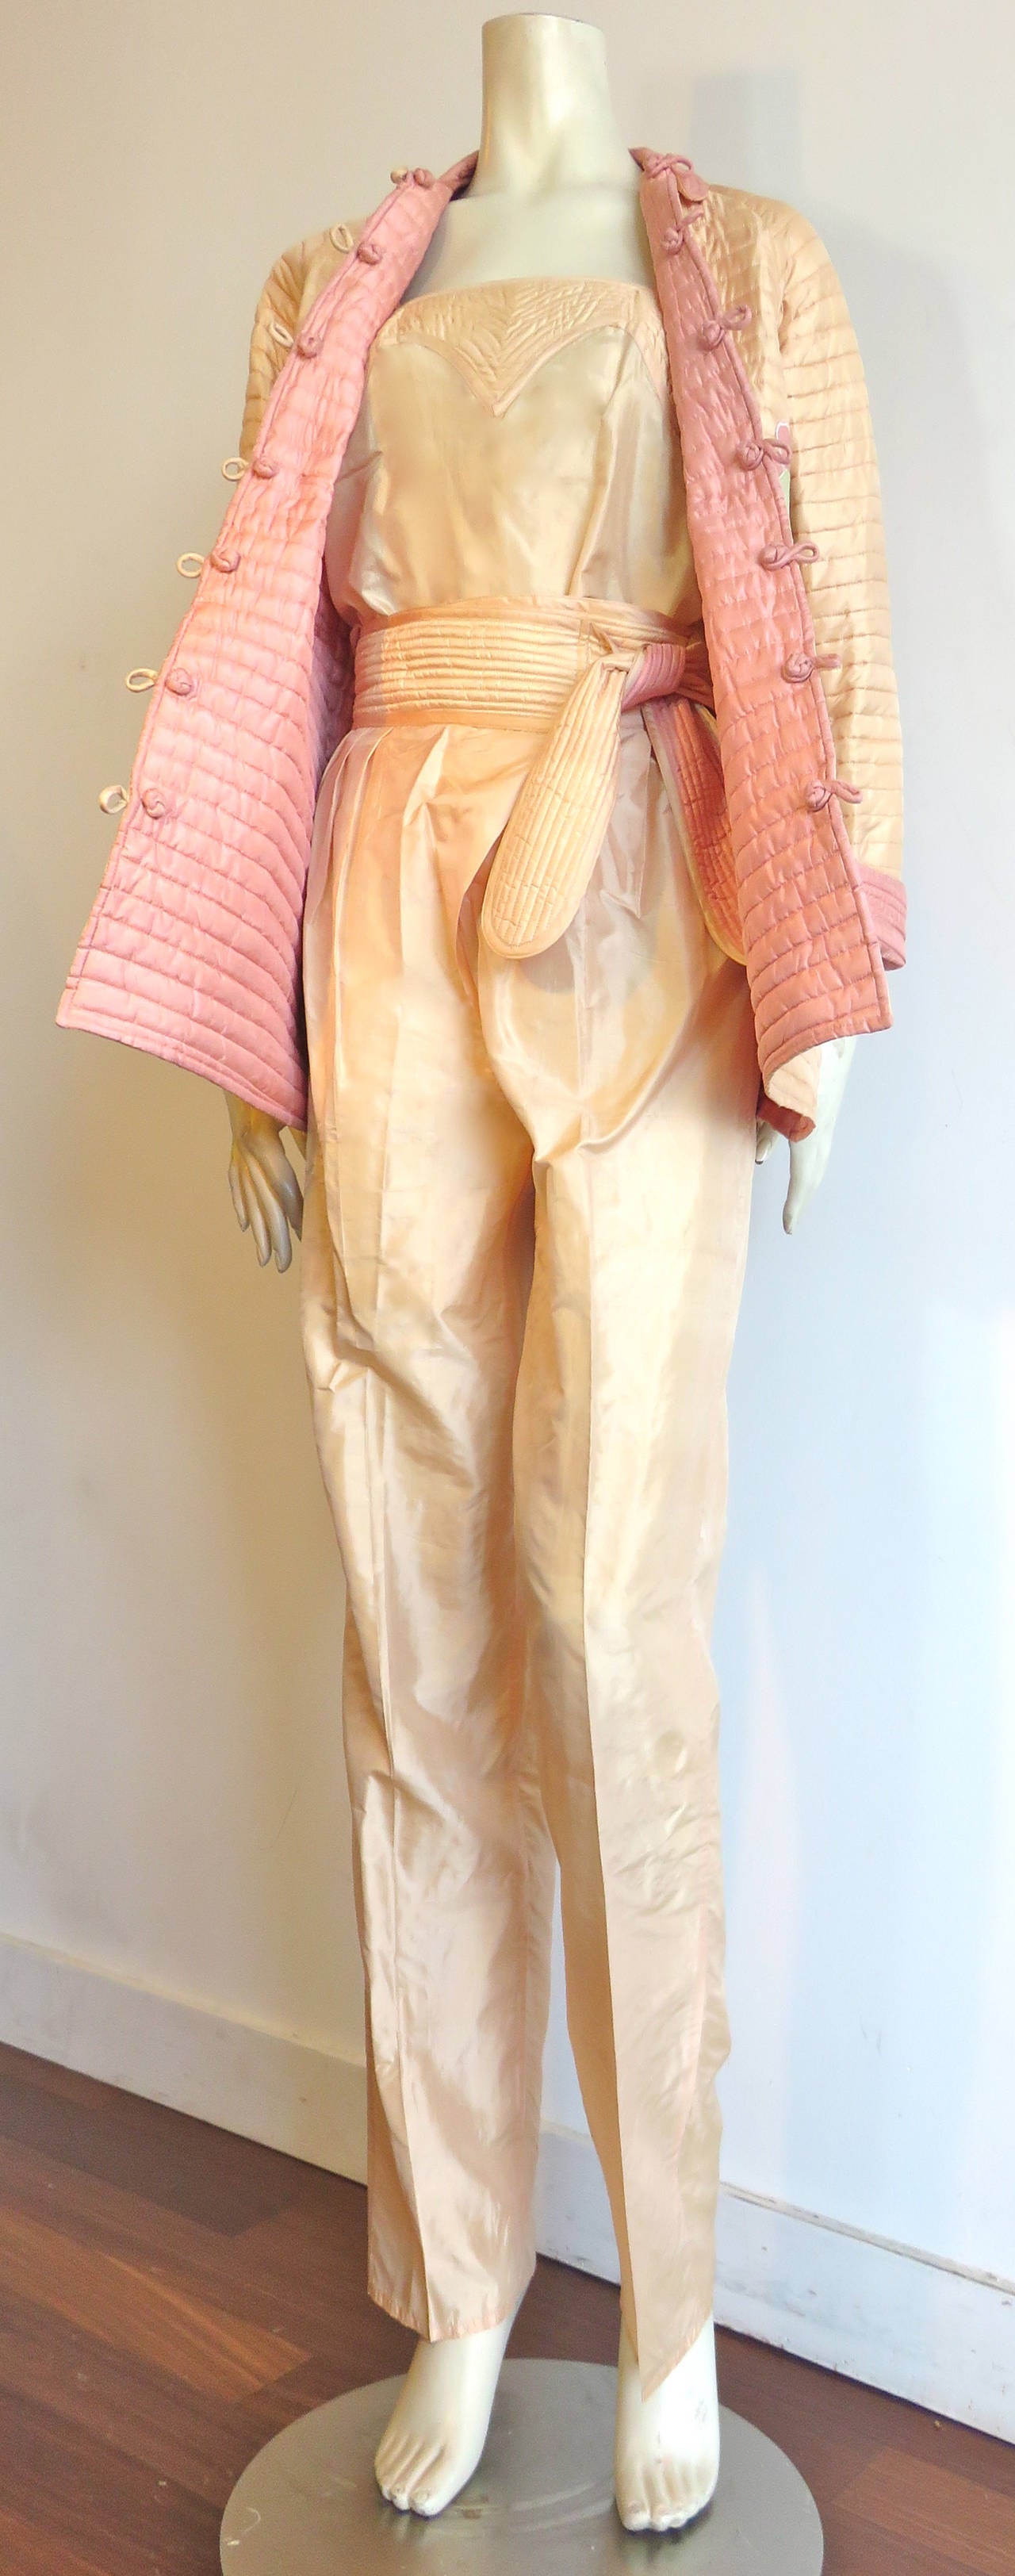 Excellent condition, 1970's BILL TICE 3pc. silk ensemble, comprised of reversible, quilted jacket, silk camisole, and belted pants.

The quilted jacket is reversible from pale peach to mauve with floral, 'morning glory' appliqué detail on back. 